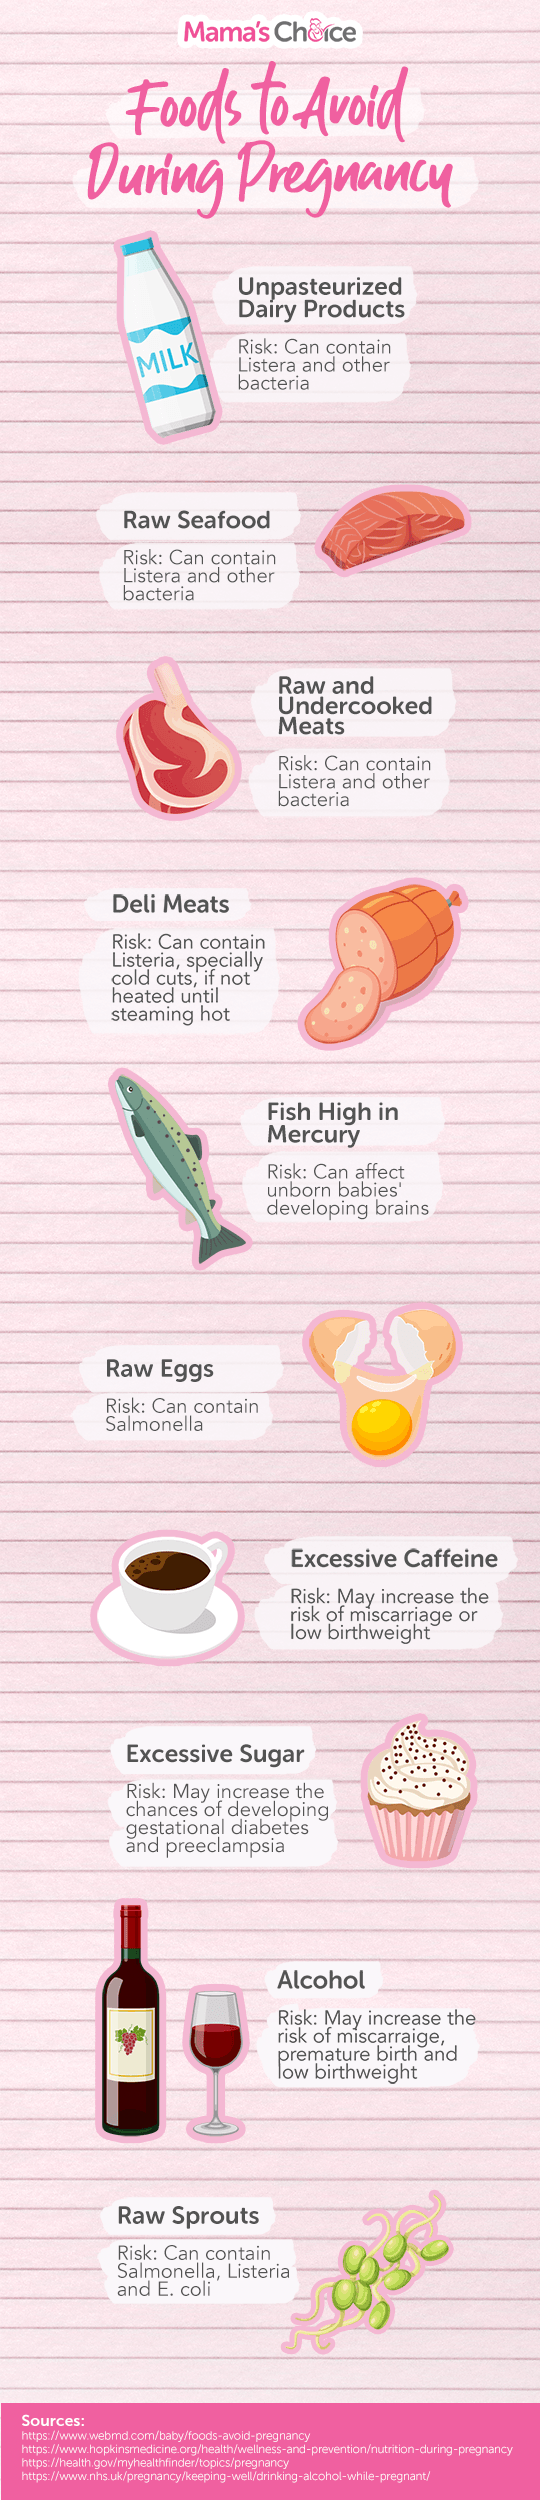 What are foods to avoid during pregnancy infographic